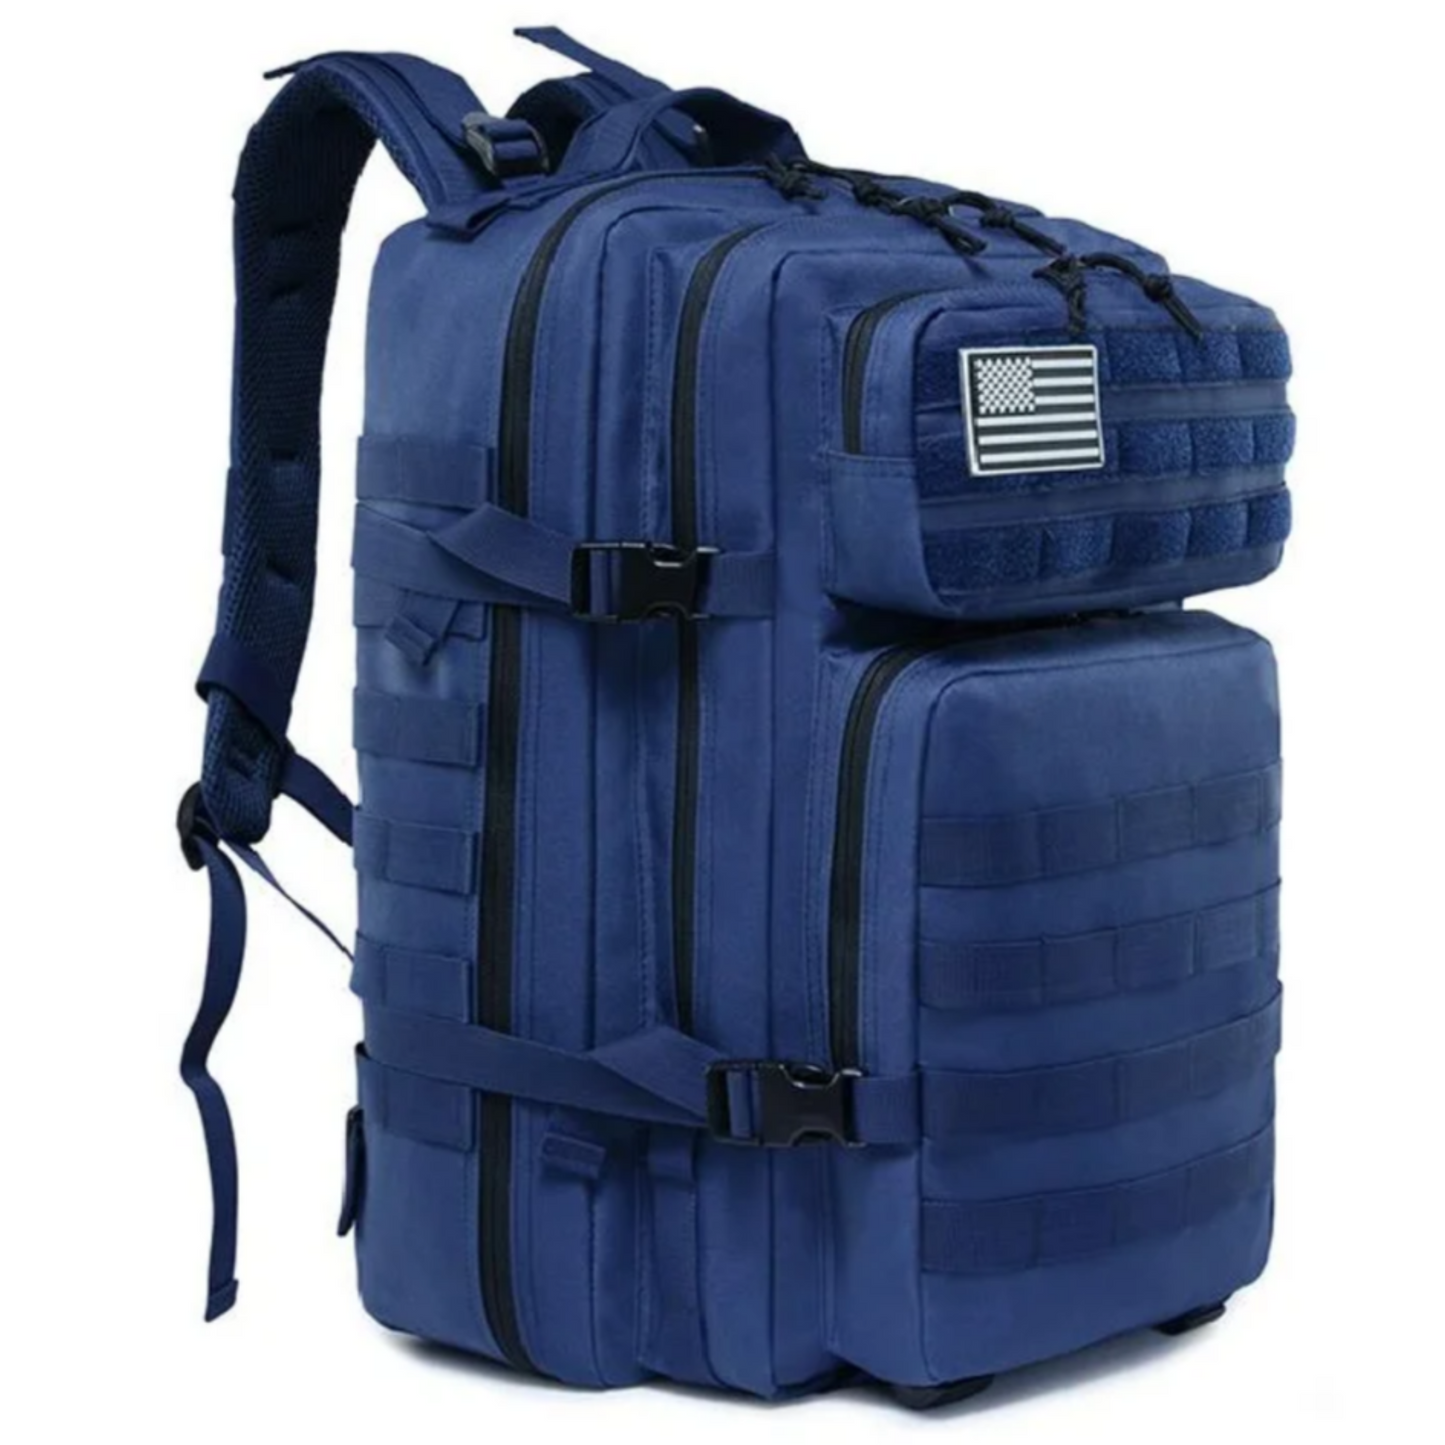 TACTICAL 3-DAY BACKPACK 45L